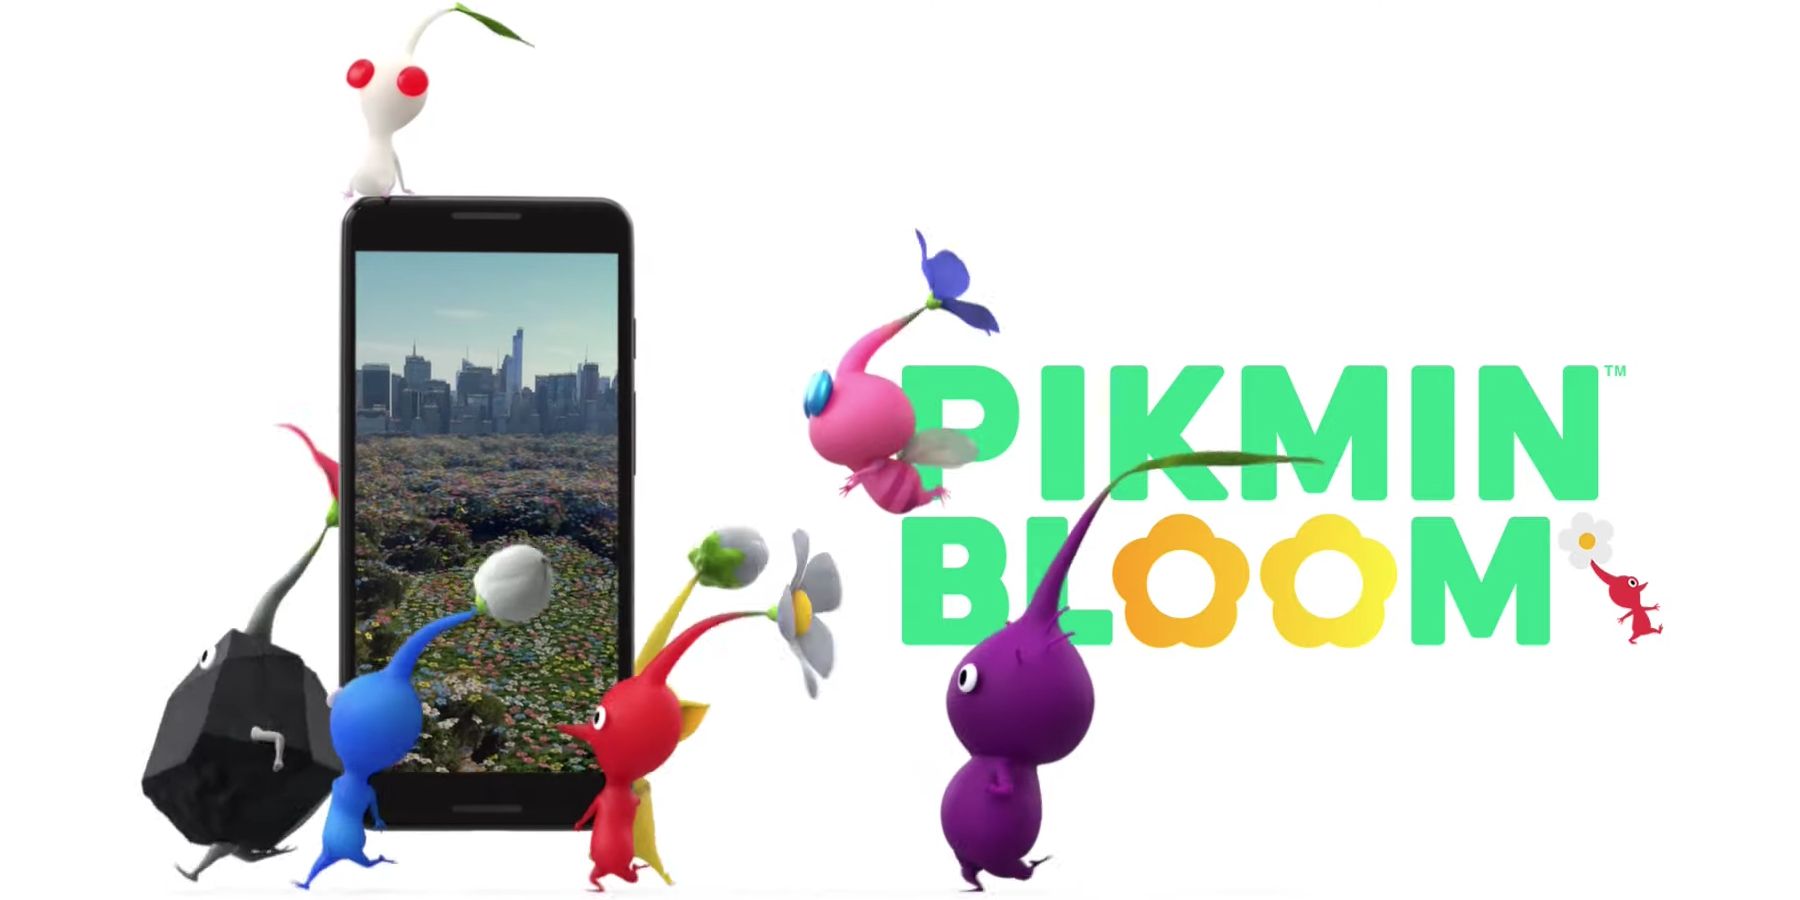 pikmin-bloom-logo-and-phone